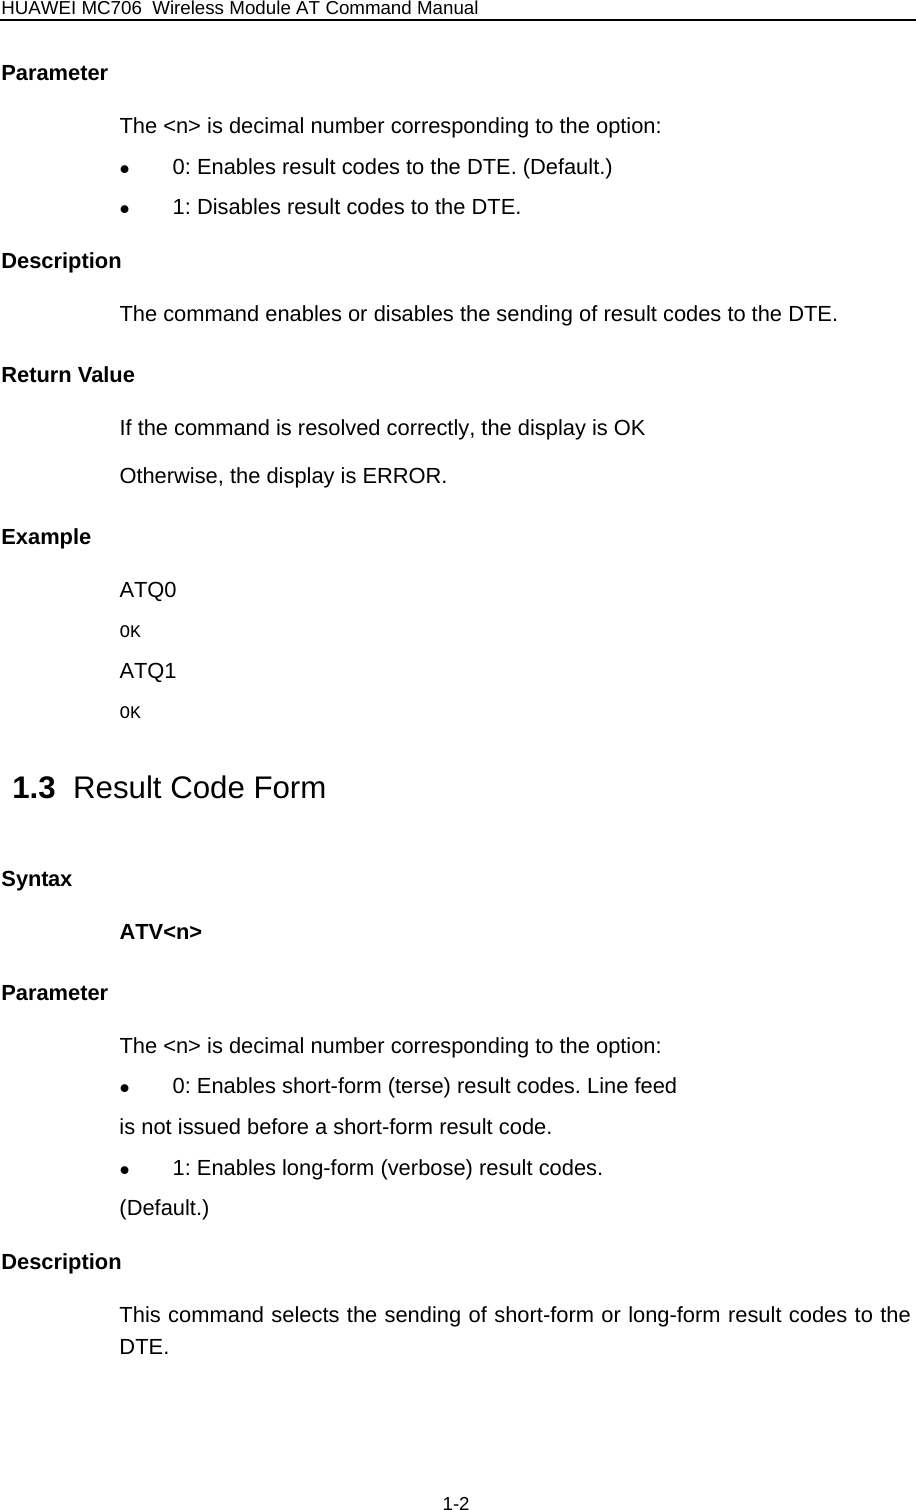 HUAWEI MC706 Wireless Module AT Command Manual Parameter The &lt;n&gt; is decimal number corresponding to the option:   z 0: Enables result codes to the DTE. (Default.) z 1: Disables result codes to the DTE. Description The command enables or disables the sending of result codes to the DTE. Return Value If the command is resolved correctly, the display is OK Otherwise, the display is ERROR. Example ATQ0 OK ATQ1 OK 1.3  Result Code Form Syntax ATV&lt;n&gt; Parameter The &lt;n&gt; is decimal number corresponding to the option:   z 0: Enables short-form (terse) result codes. Line feed is not issued before a short-form result code. z 1: Enables long-form (verbose) result codes. (Default.) Description This command selects the sending of short-form or long-form result codes to the DTE. 1-2 